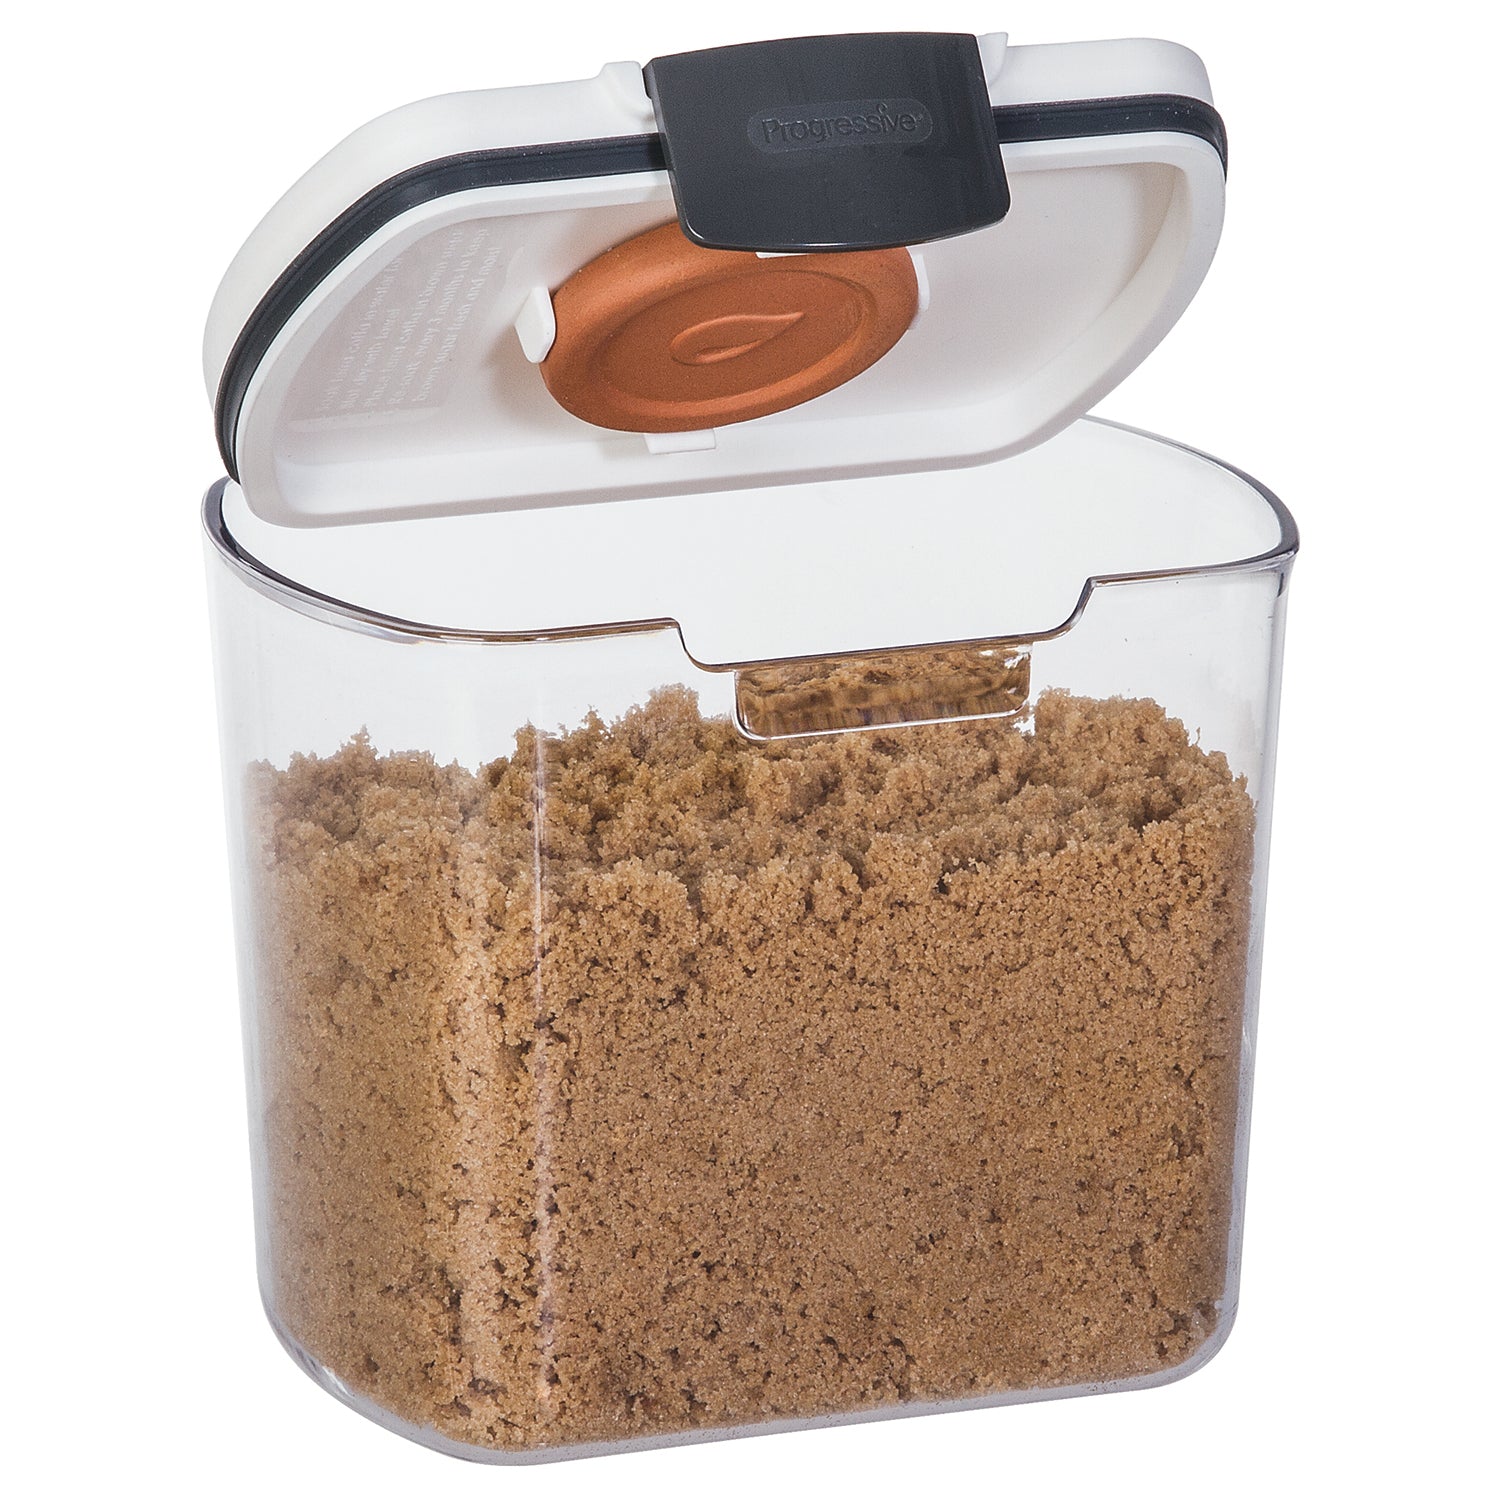  OXO Good Grips POP Container Brown Sugar Keeper: Home & Kitchen